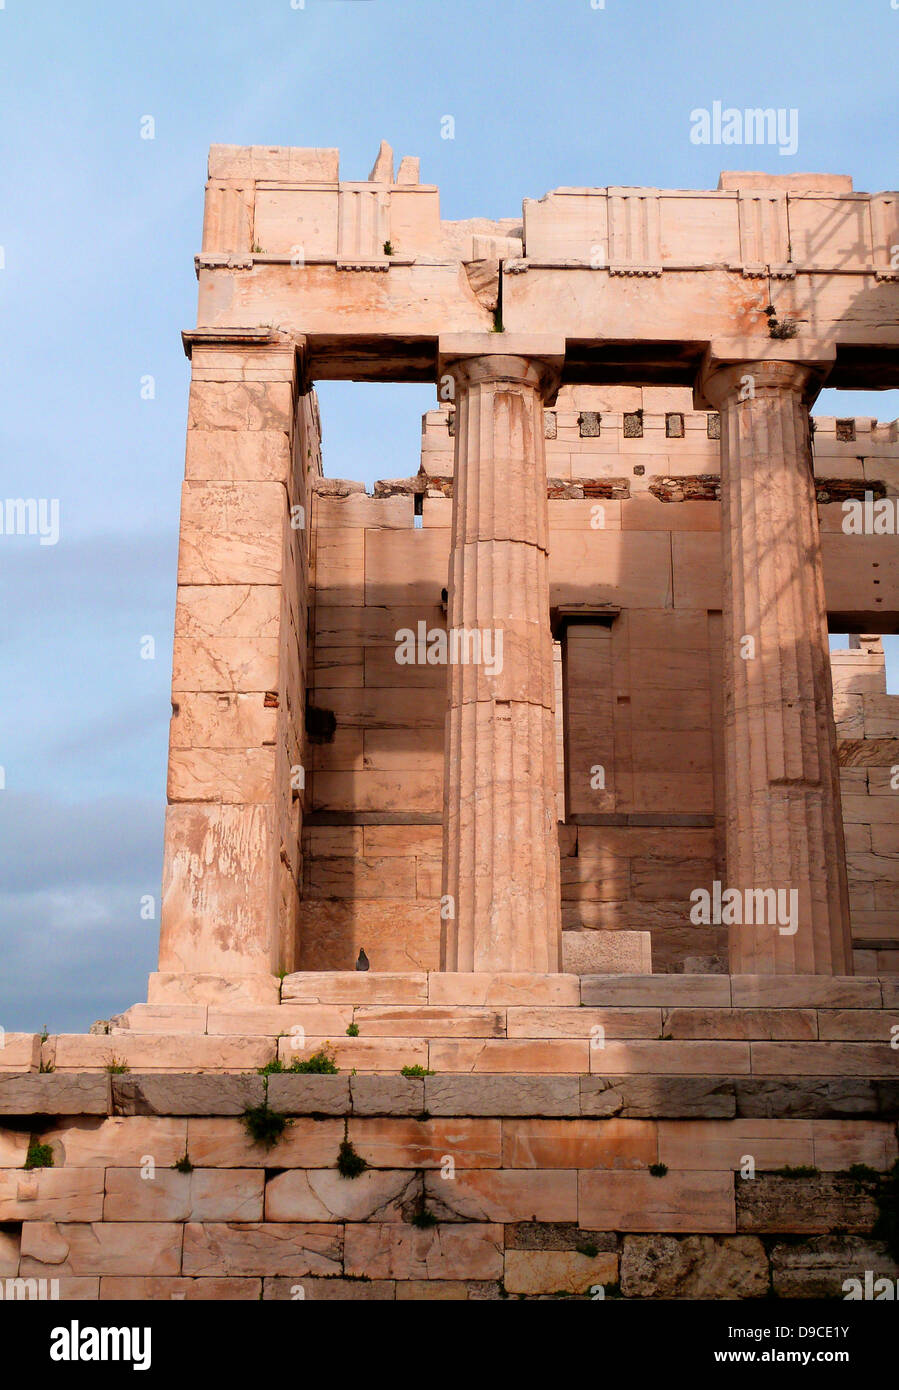 The monumental gateway to the Acropolis, the Propylaea was built under the general direction of the Athenian leader Pericles, but Phidias was given the responsibility for planning the rebuilding the Acropolis as a whole at the conclusion of the Persian Wars. According to Plutarch, the Propylaea was designed by the architect Mnesicles. Construction began in 437 BCE and was terminated in 432, when the building was still unfinished. Stock Photo